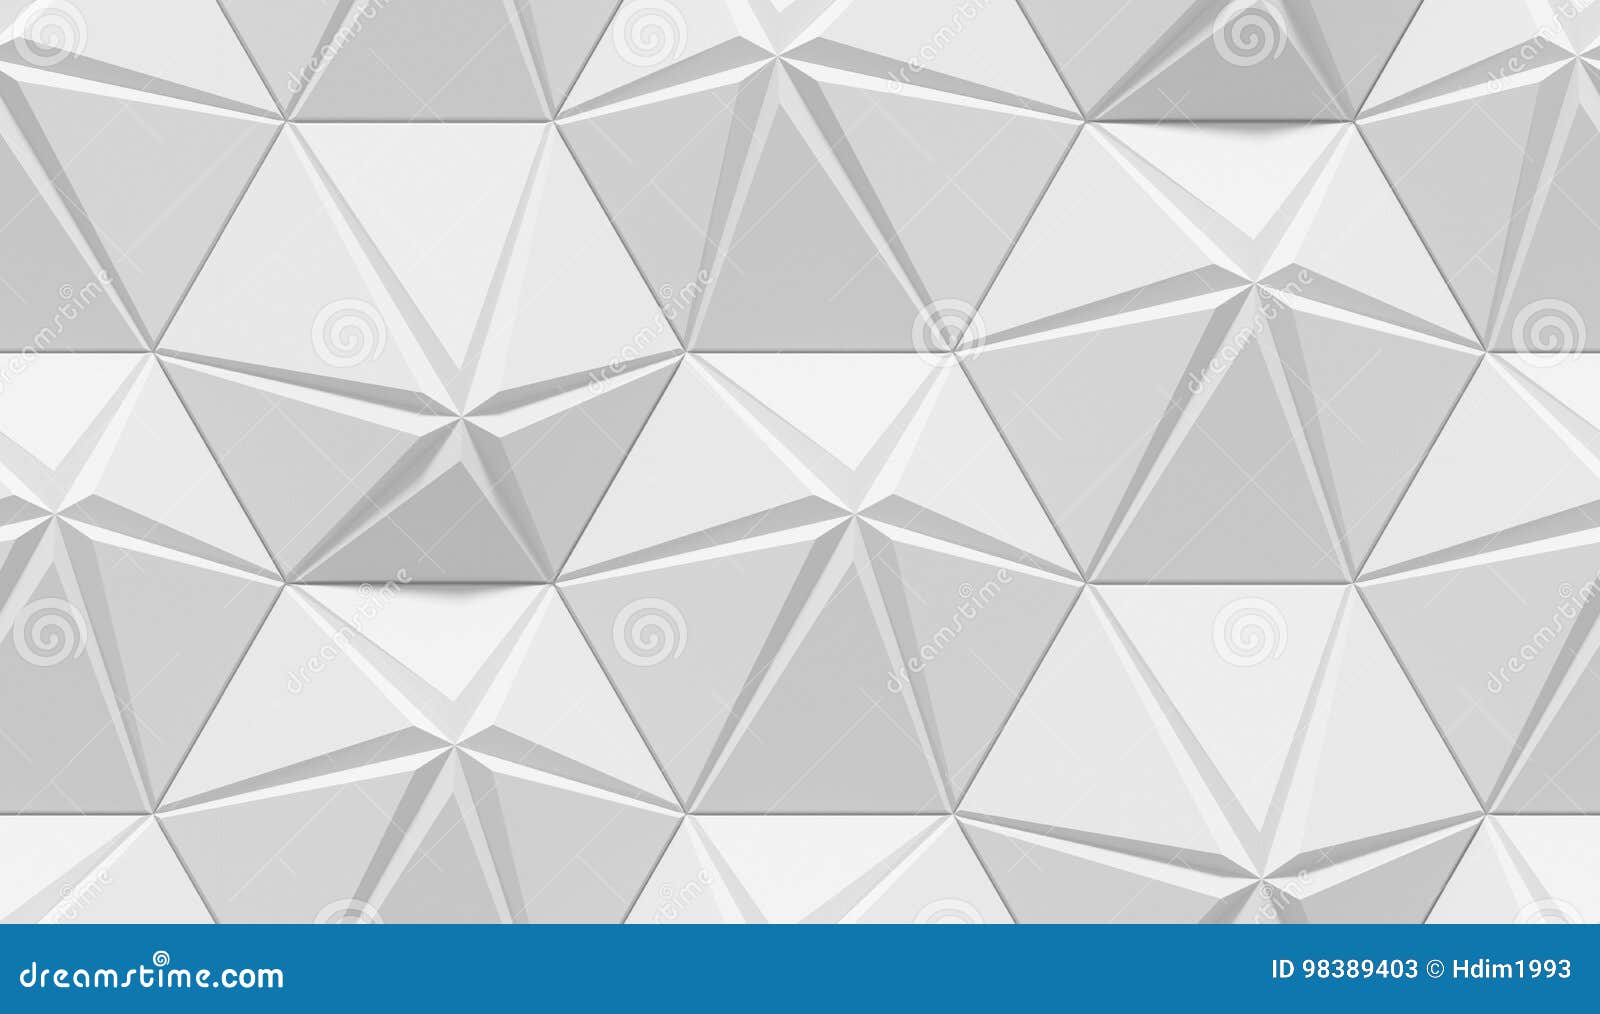 White Shaded Abstract Geometric Pattern. Origami Paper Style. 3D ...